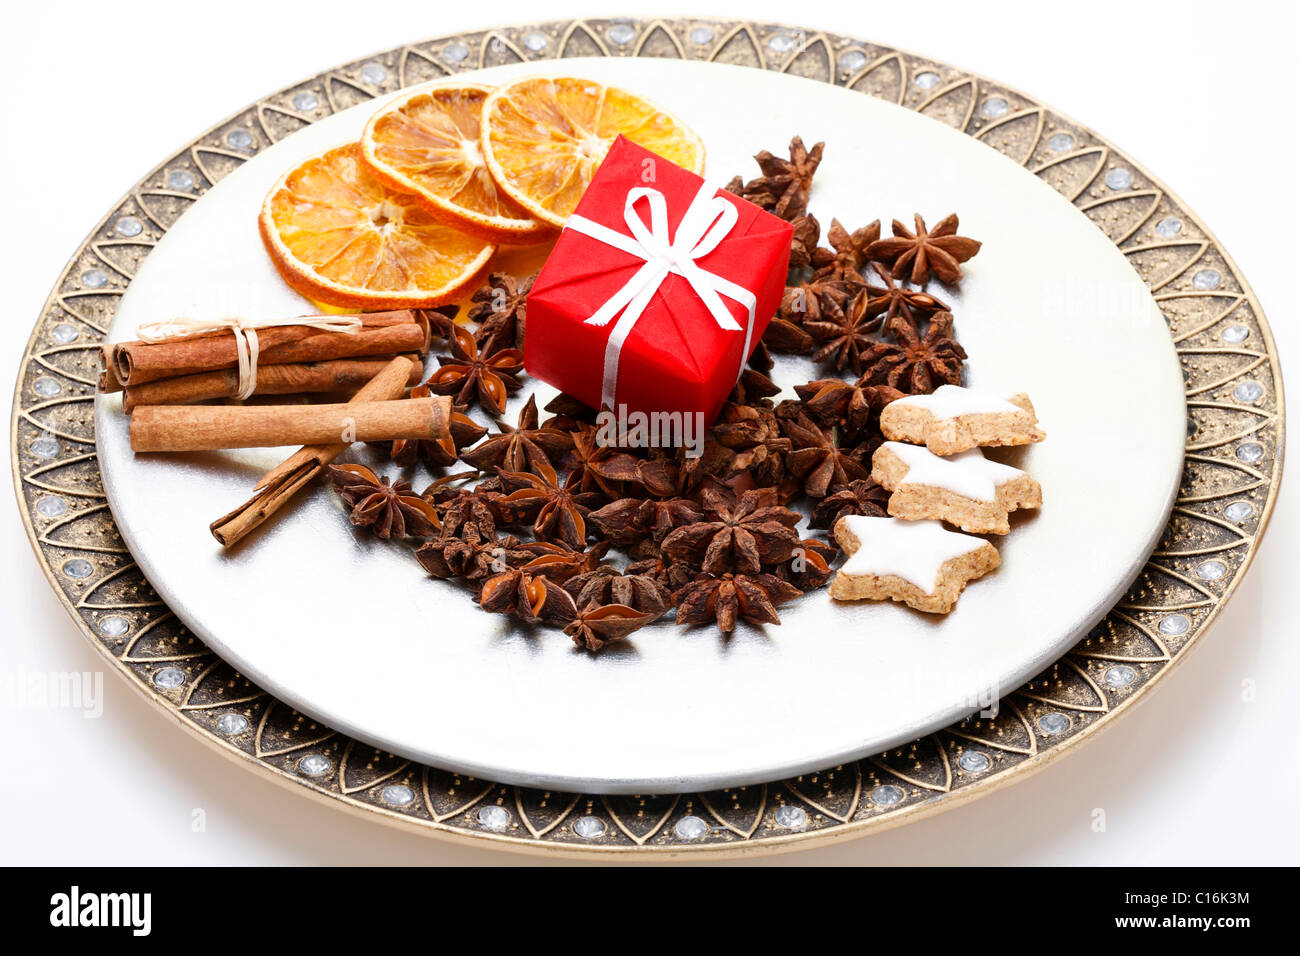 Christmas present, star anise, cinnamon sticks and dried slices of orange on a plate Stock Photo